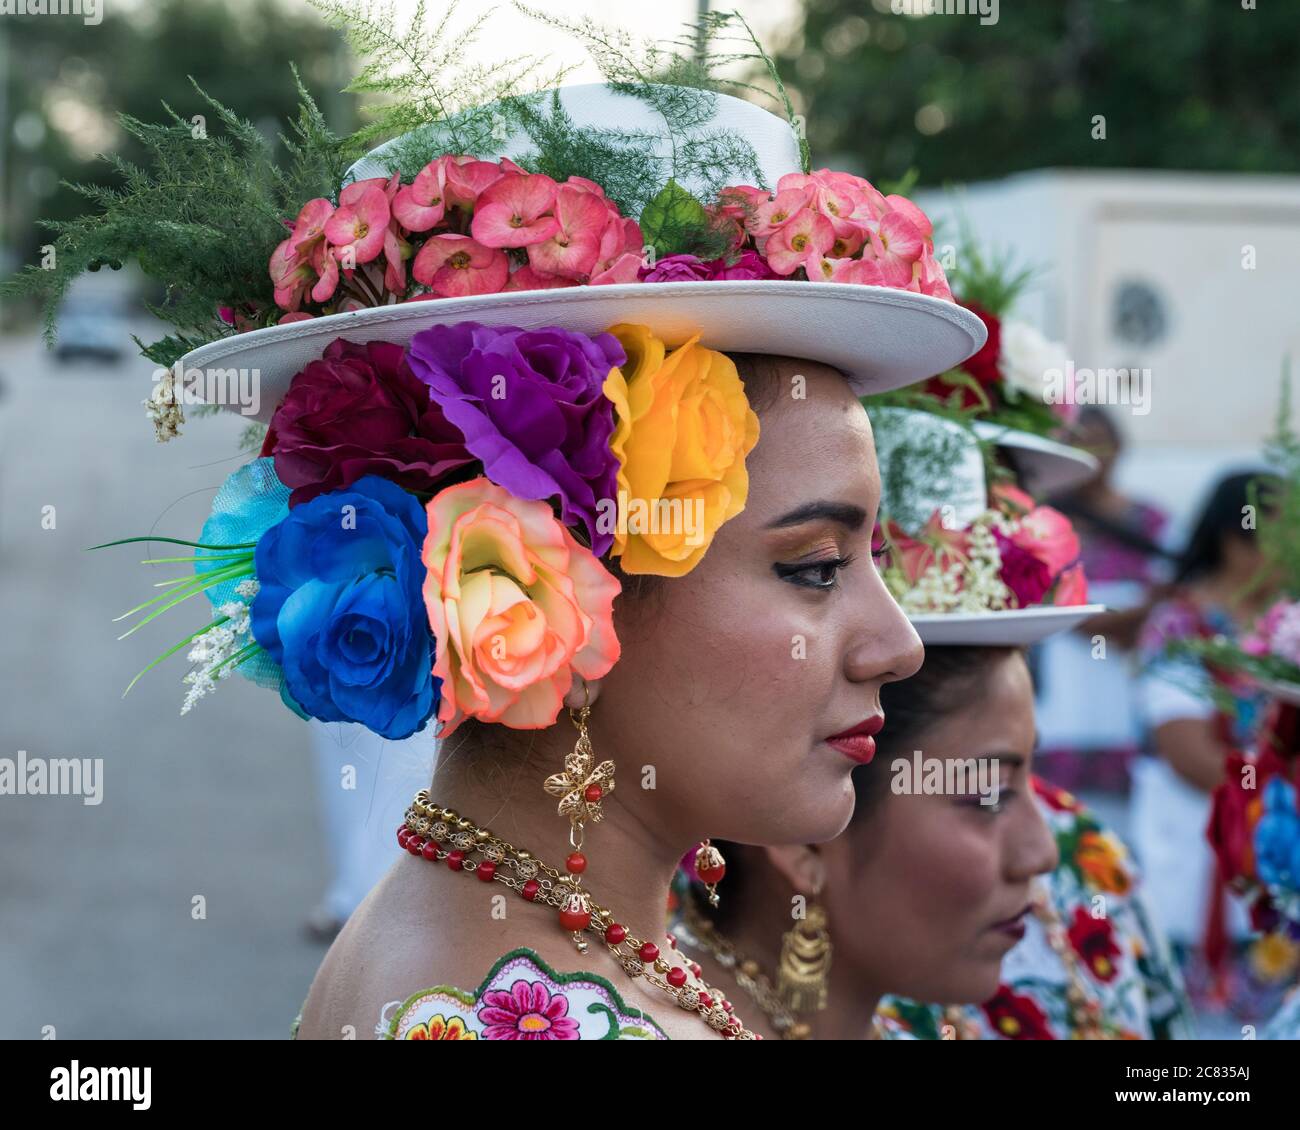 Women in tradtional festive embroidered huipils and flowered hats prepare for the Dance of the Pig's Head and of the Turkey, or Baile de la cabeza del Stock Photo